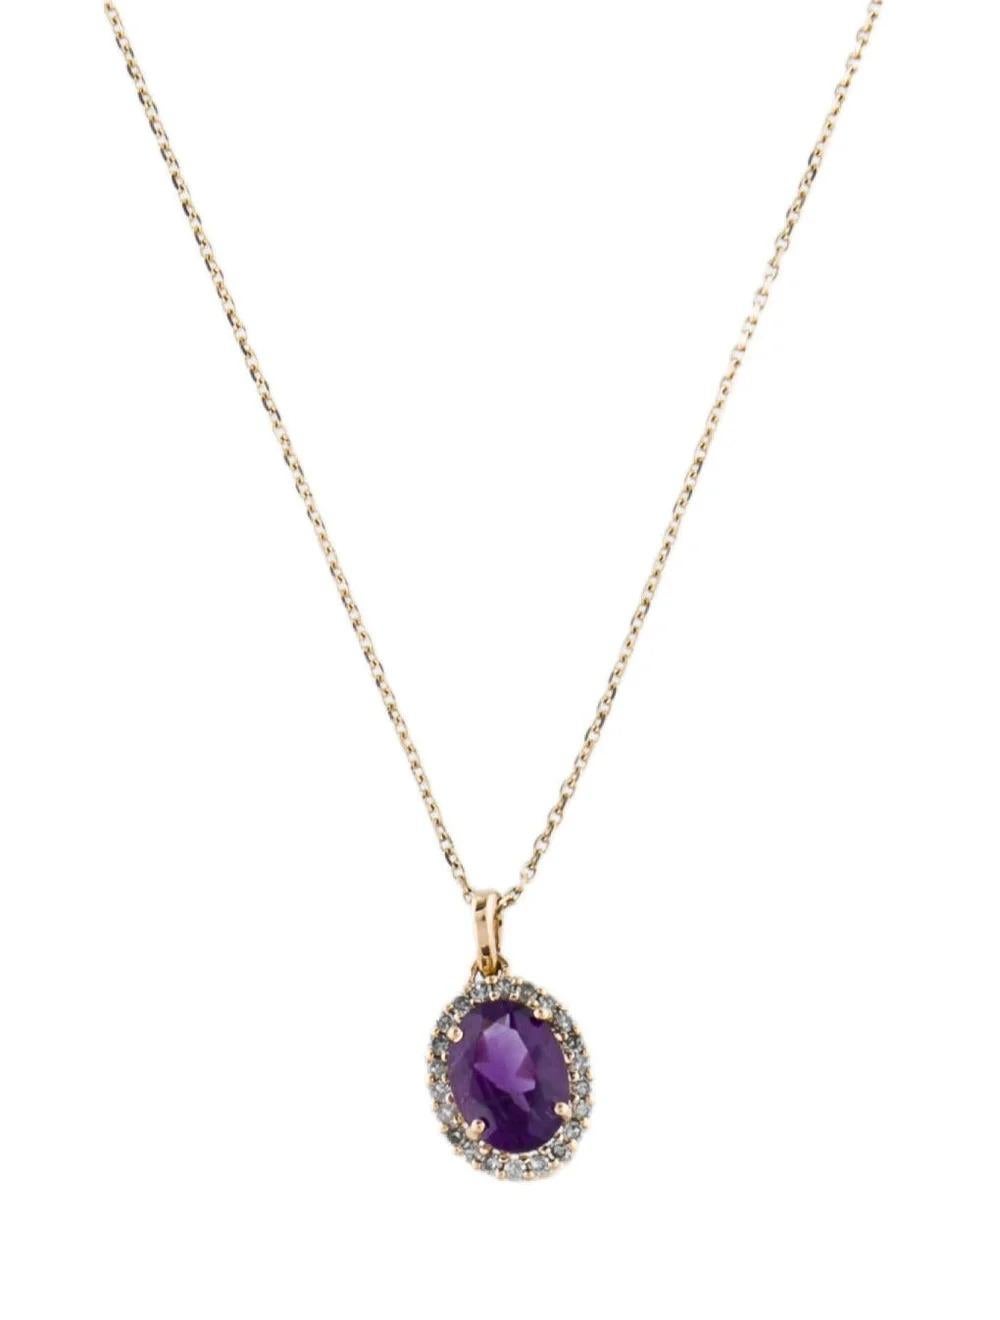 Indulge in timeless elegance with this exquisite 14K Yellow Gold pendant necklace, adorned with a captivating 1.10 Carat Oval Modified Brilliant Amethyst complemented by delicate diamond accents.

SPECIFICATIONS:

* Metal Type: 14K Yellow Gold
*